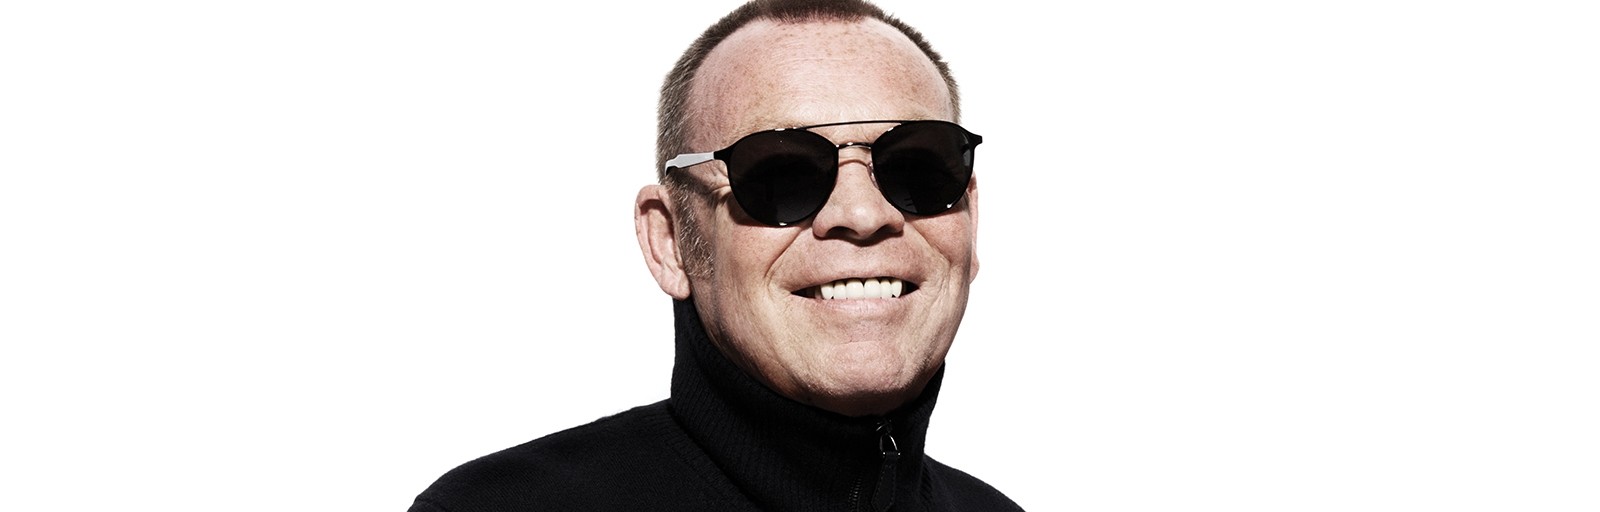 UB40 featuring Ali Campbell 